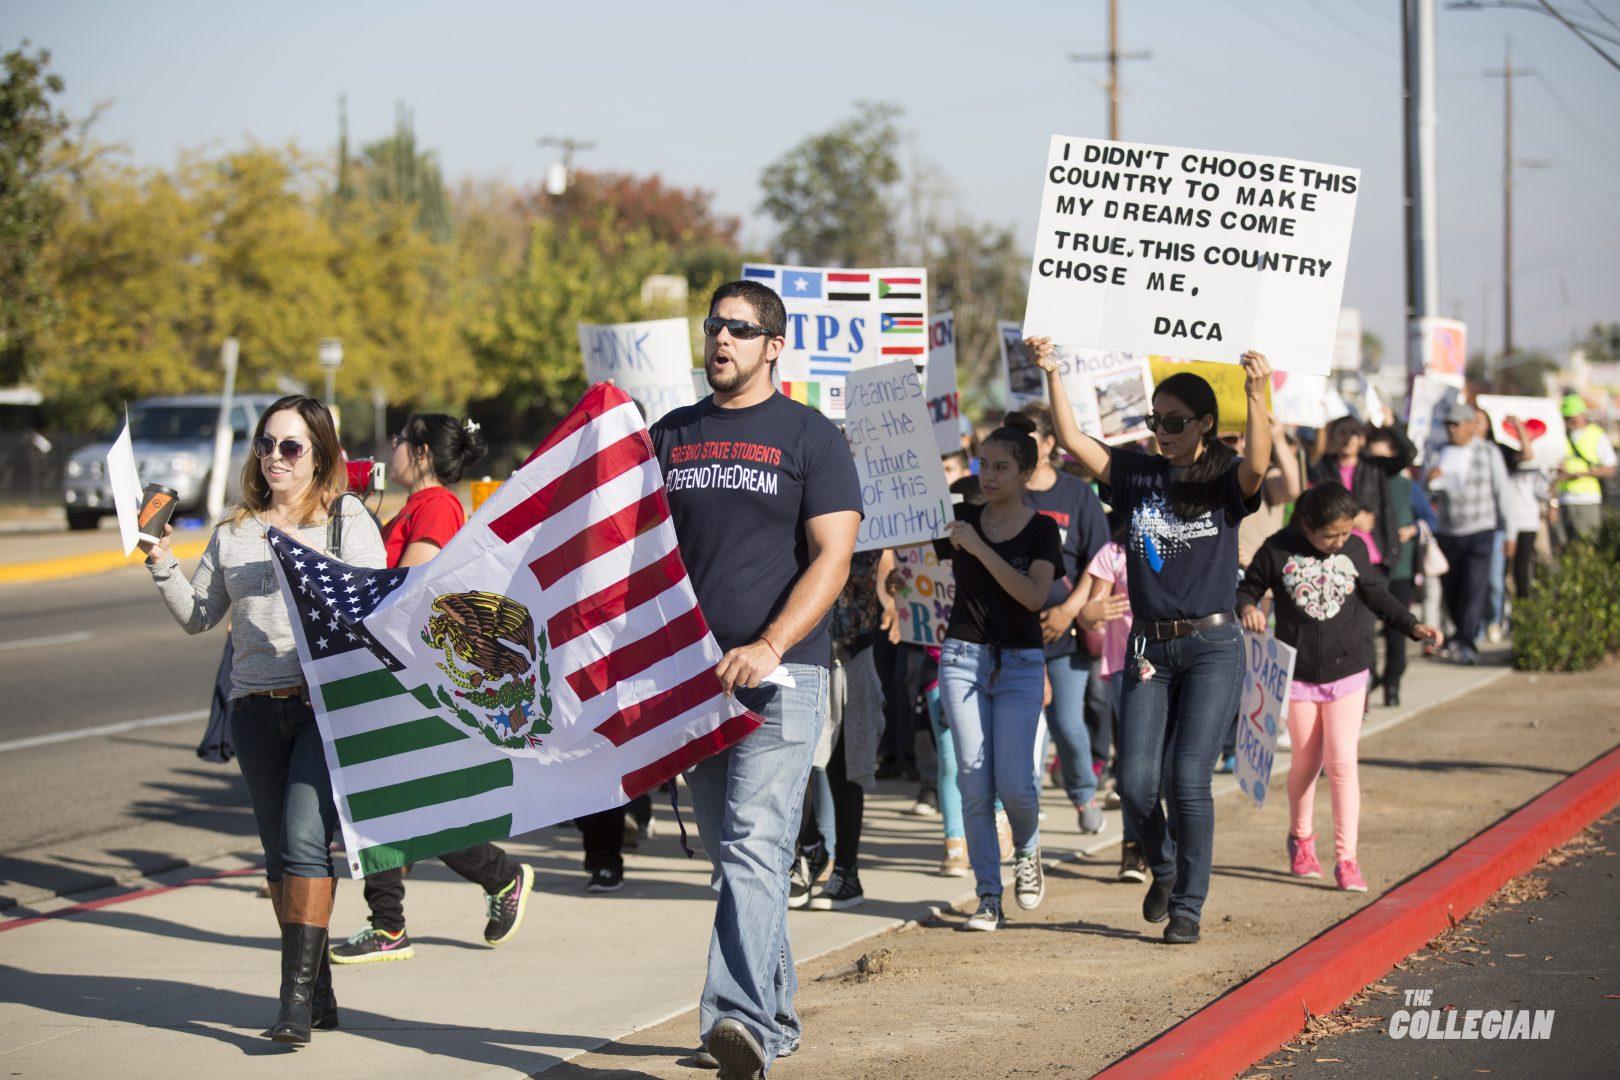 PHOTOS: Students take to the street to demand immigration reform